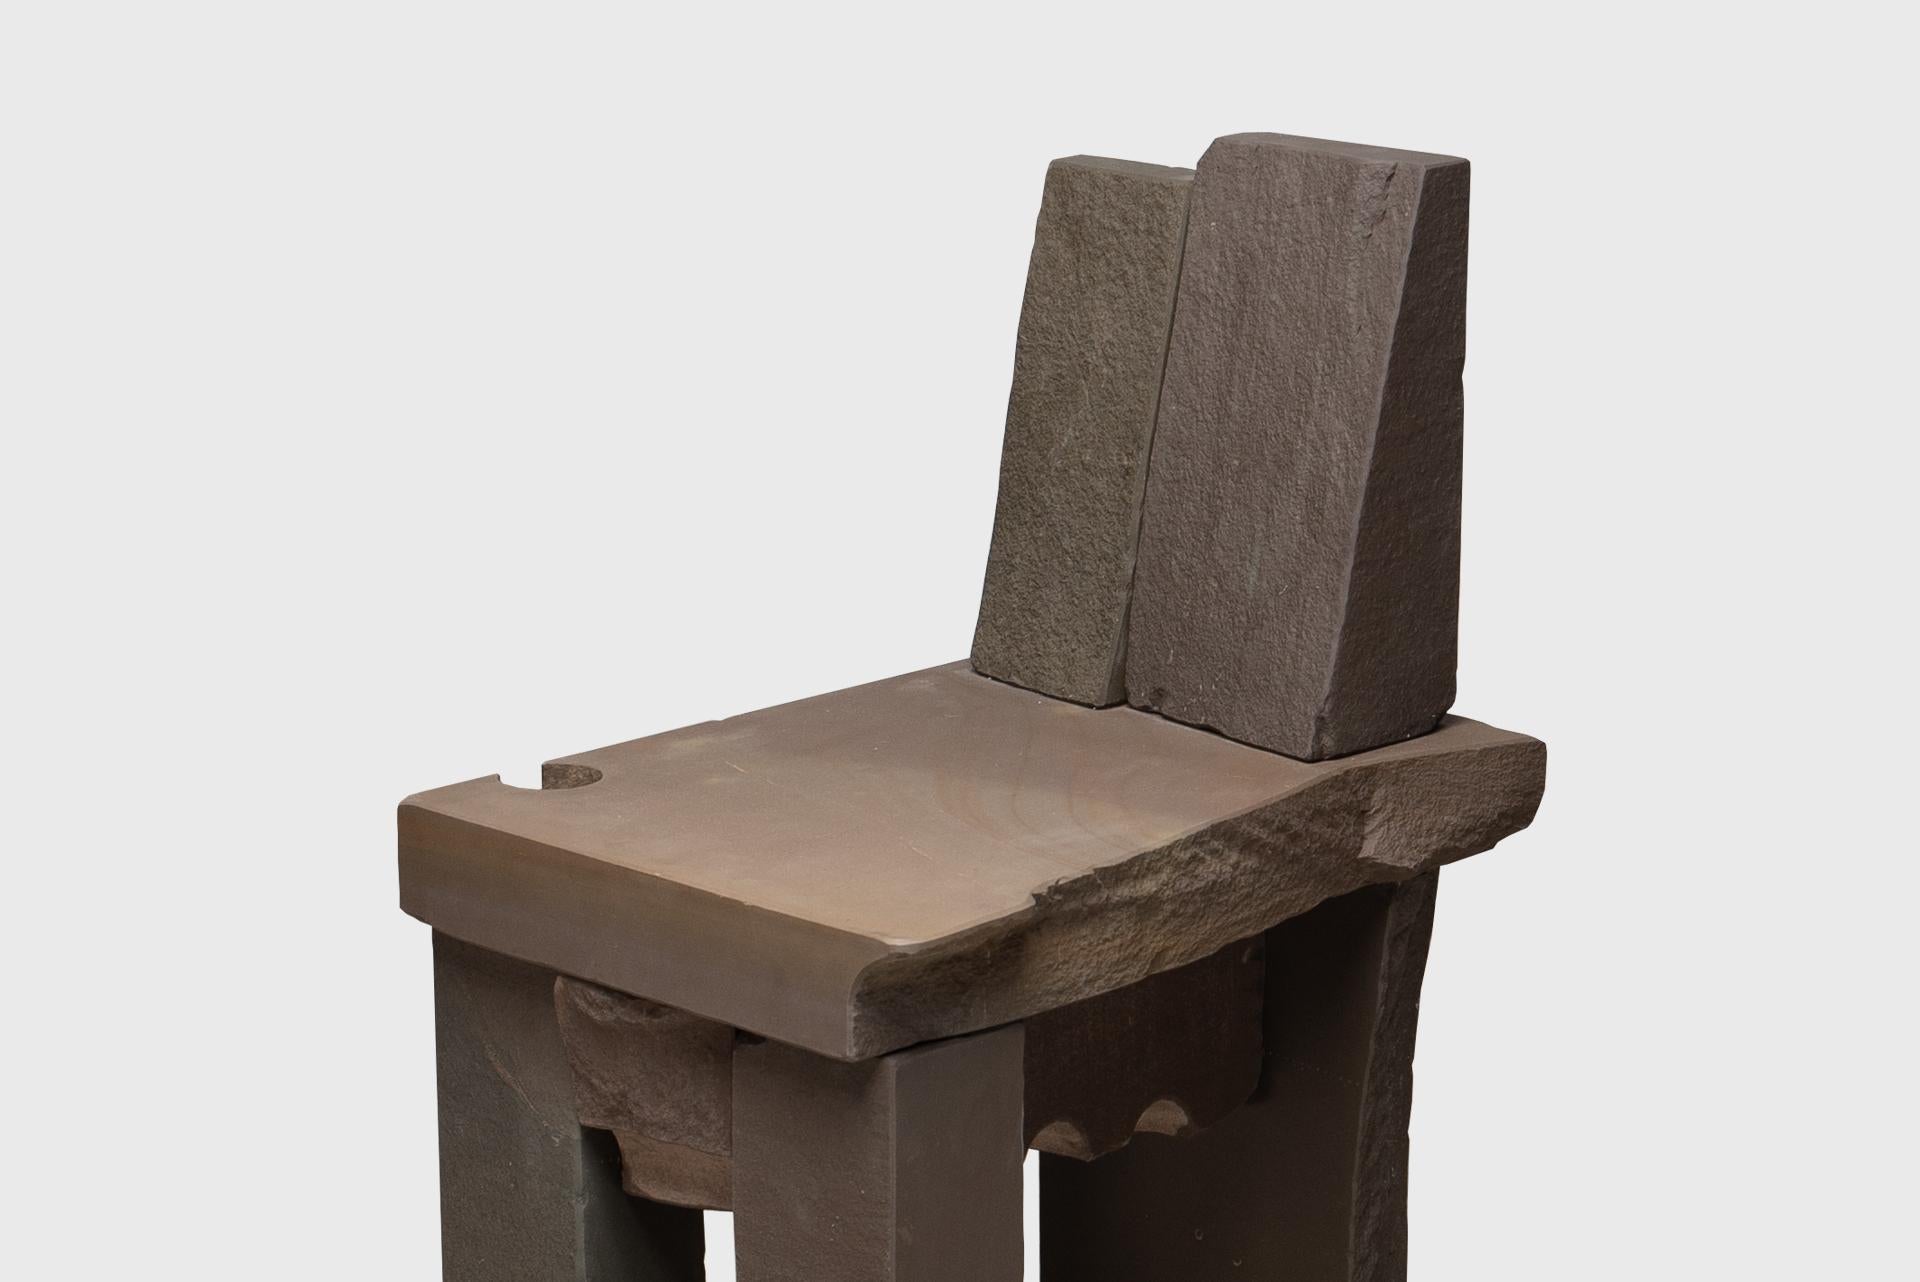 Contemporary Natural Chair 10, Graywacke Offcut Gray Stone, Carsten in der Elst For Sale 5